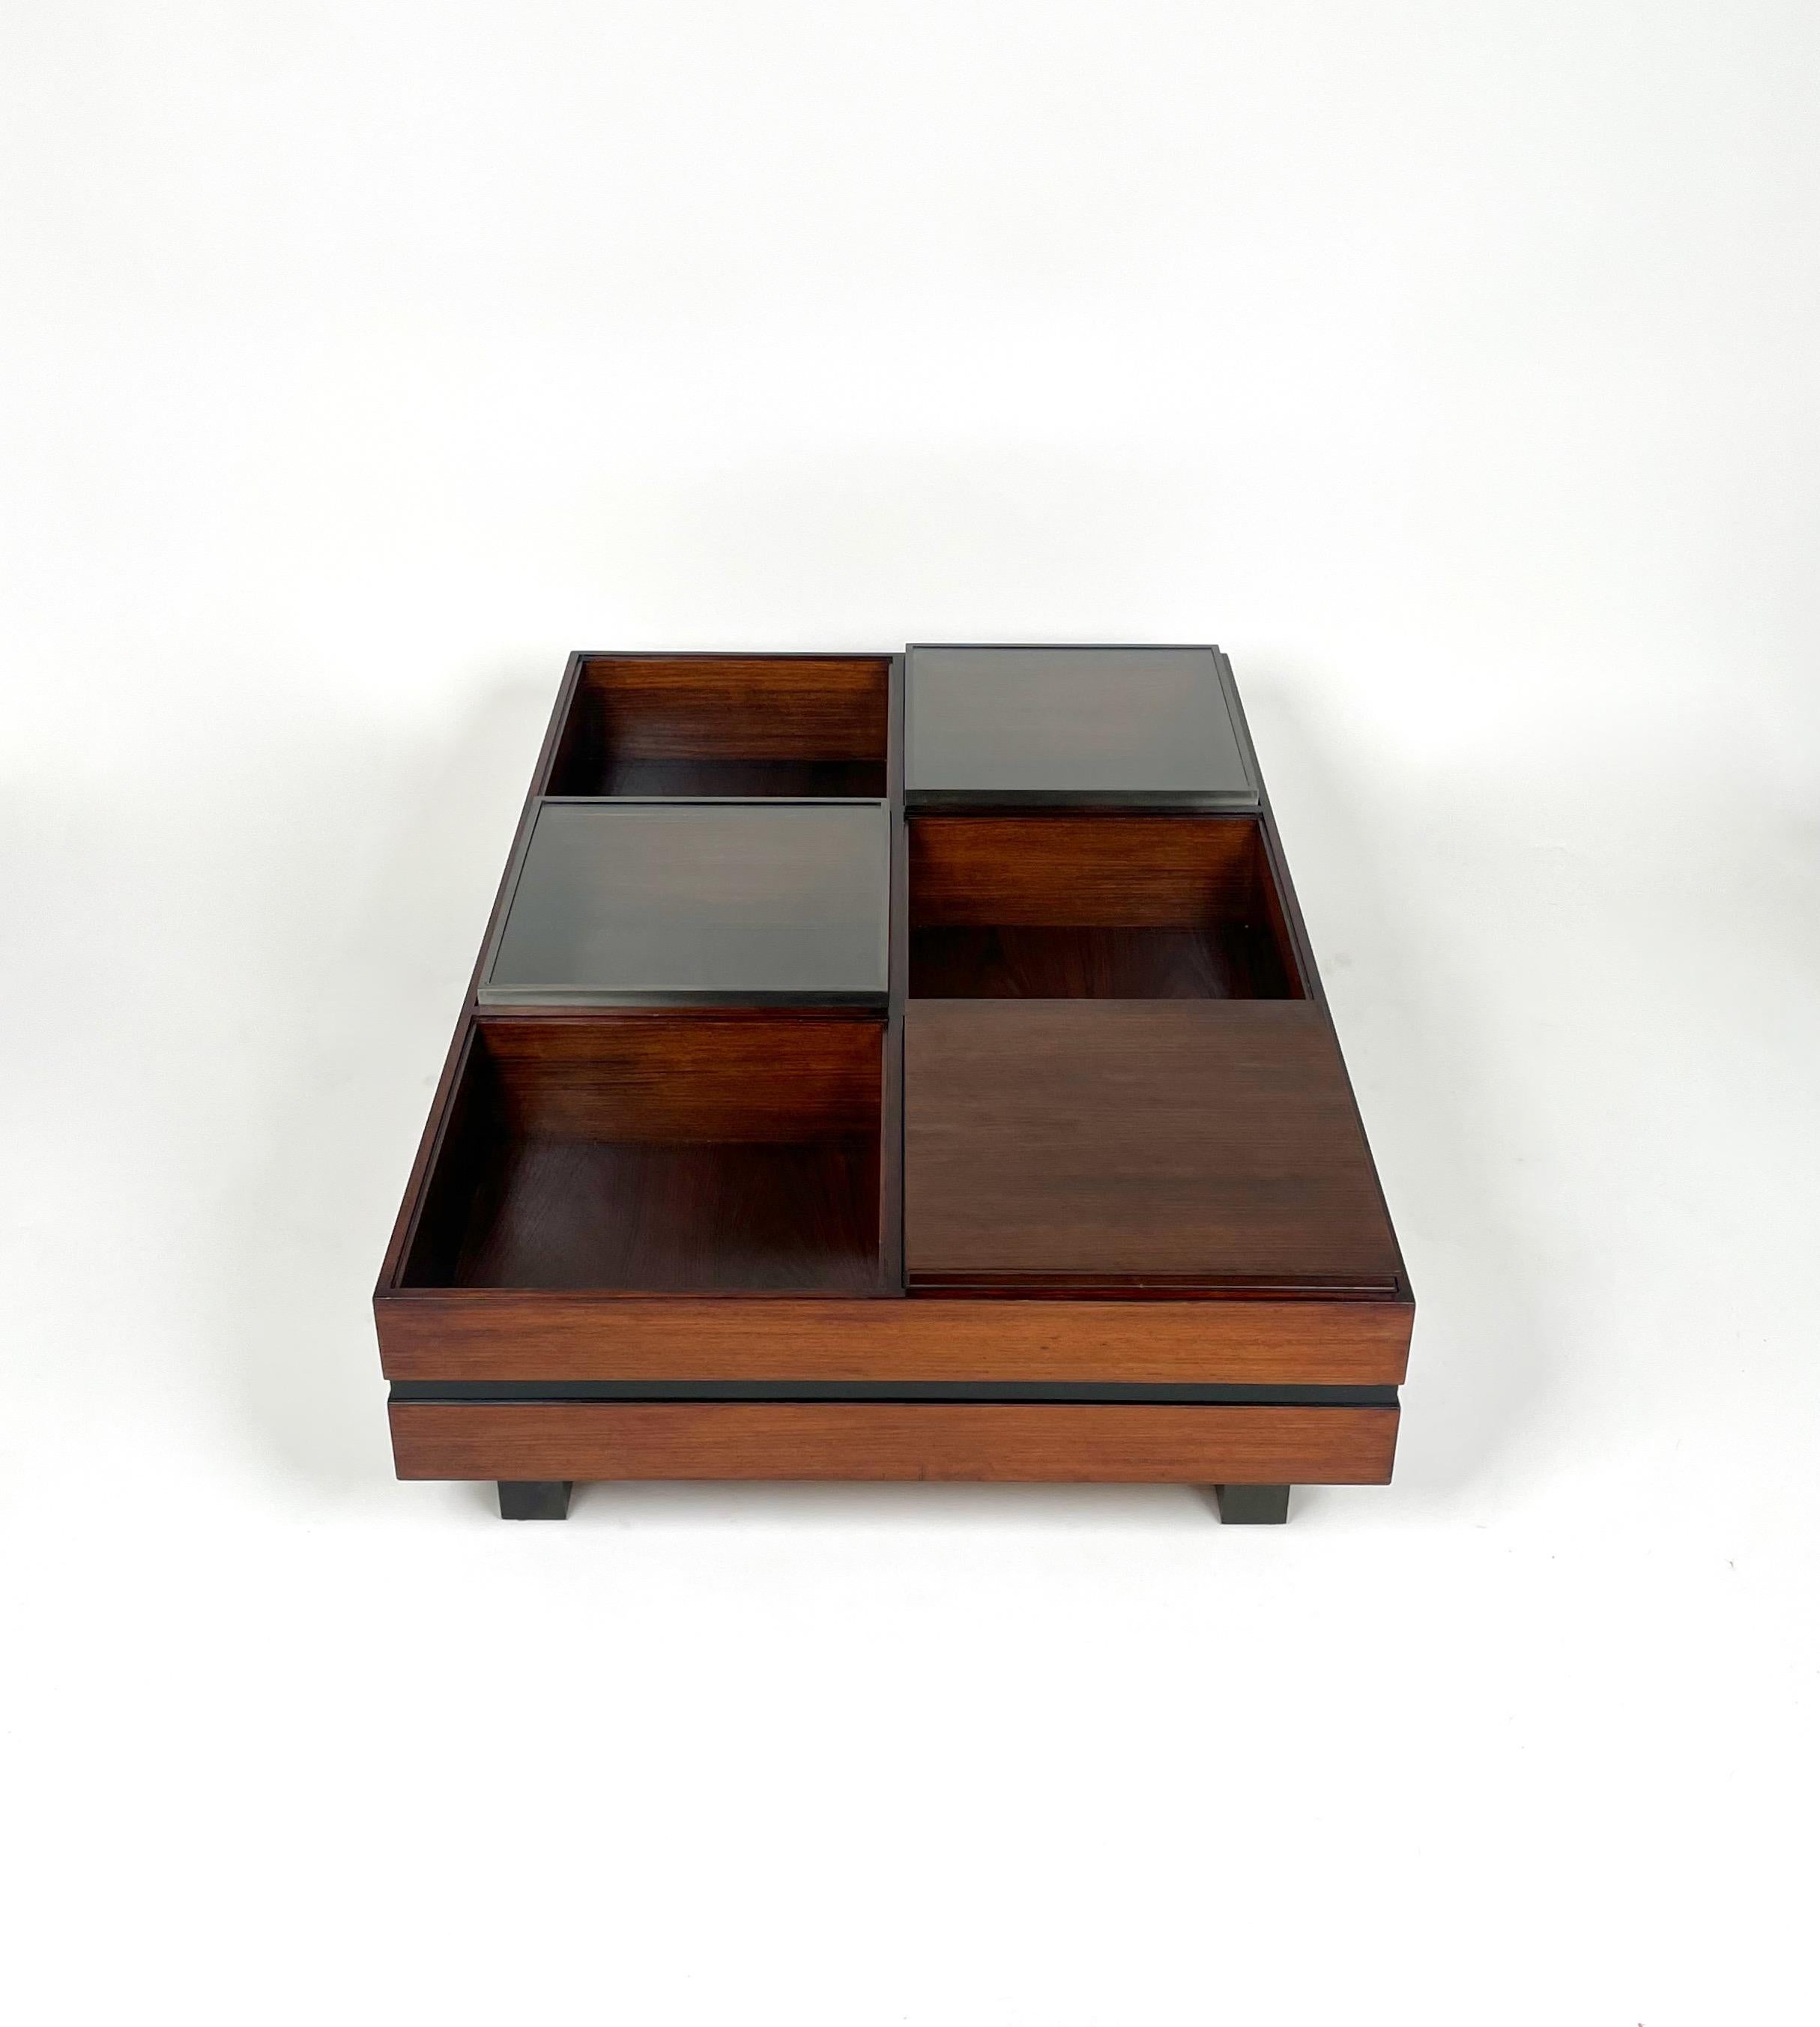 Mid-20th Century Luigi Sormani Rectangular Modular Coffee Table in Wood and Glass, Italy, 1960s For Sale